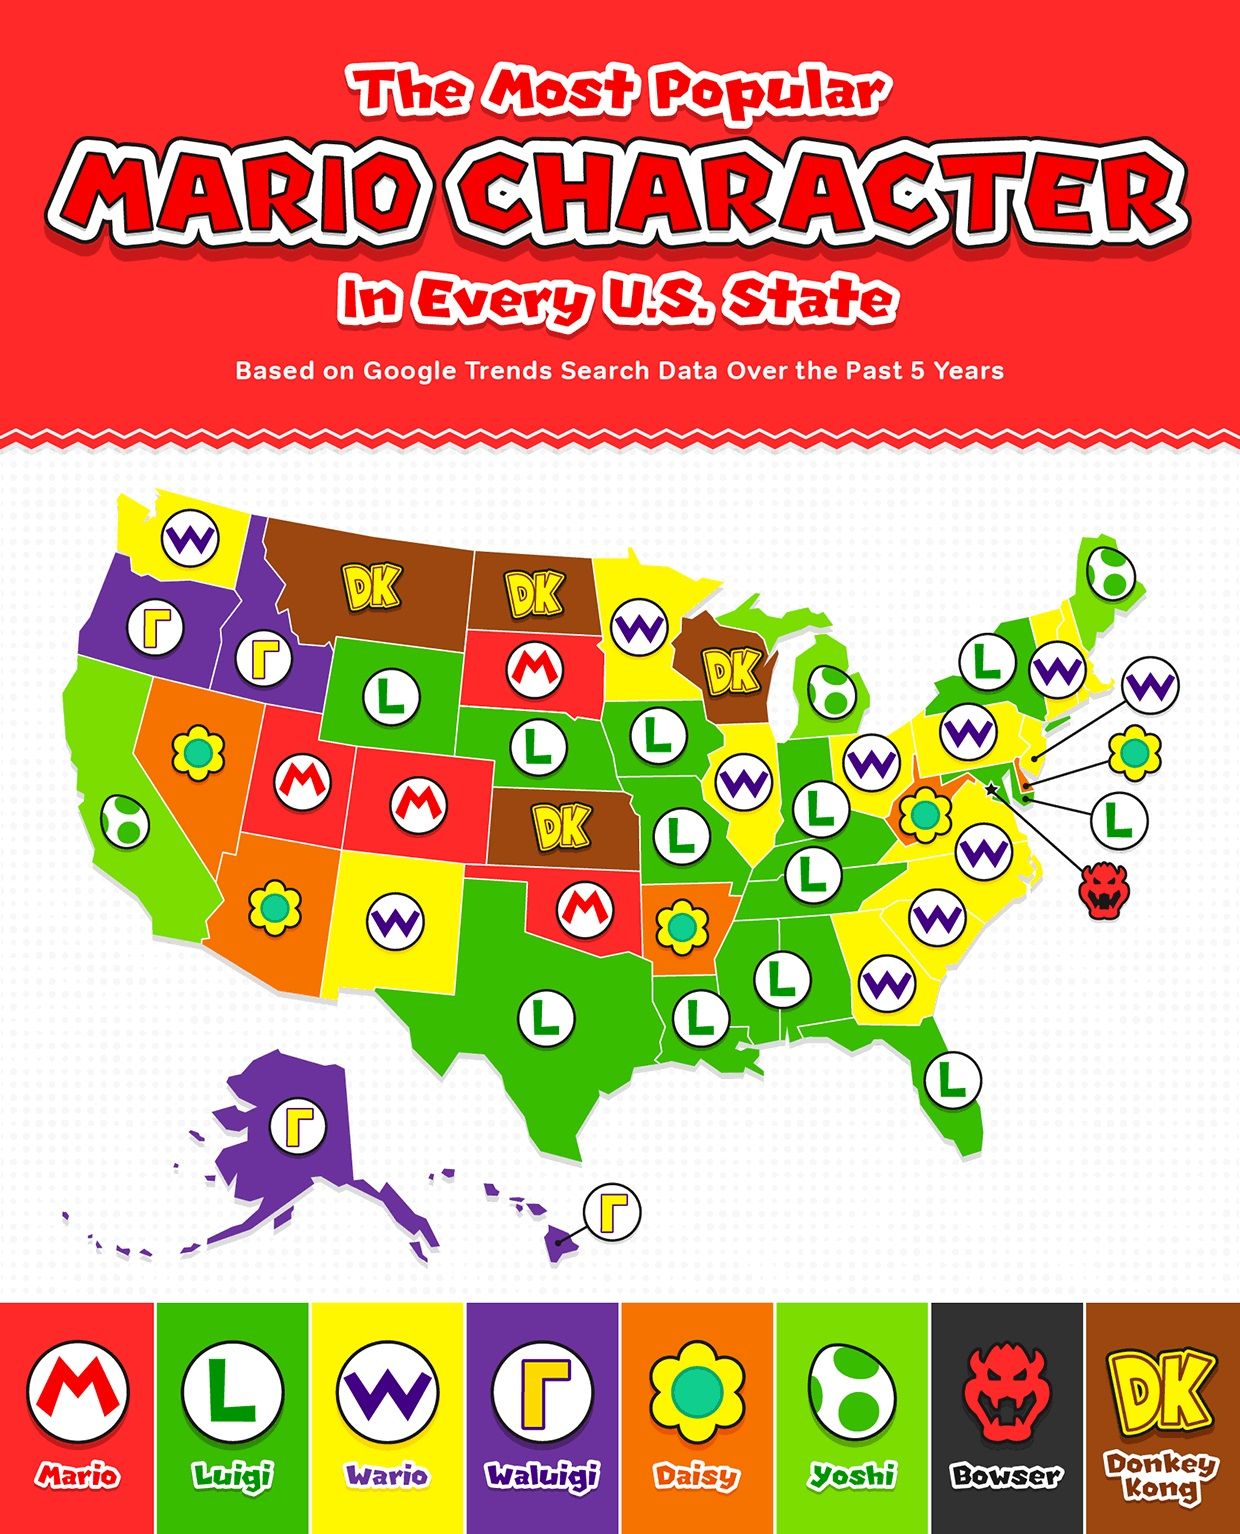 Chart Claims to Show Most Popular Super Mario Character in Each US State